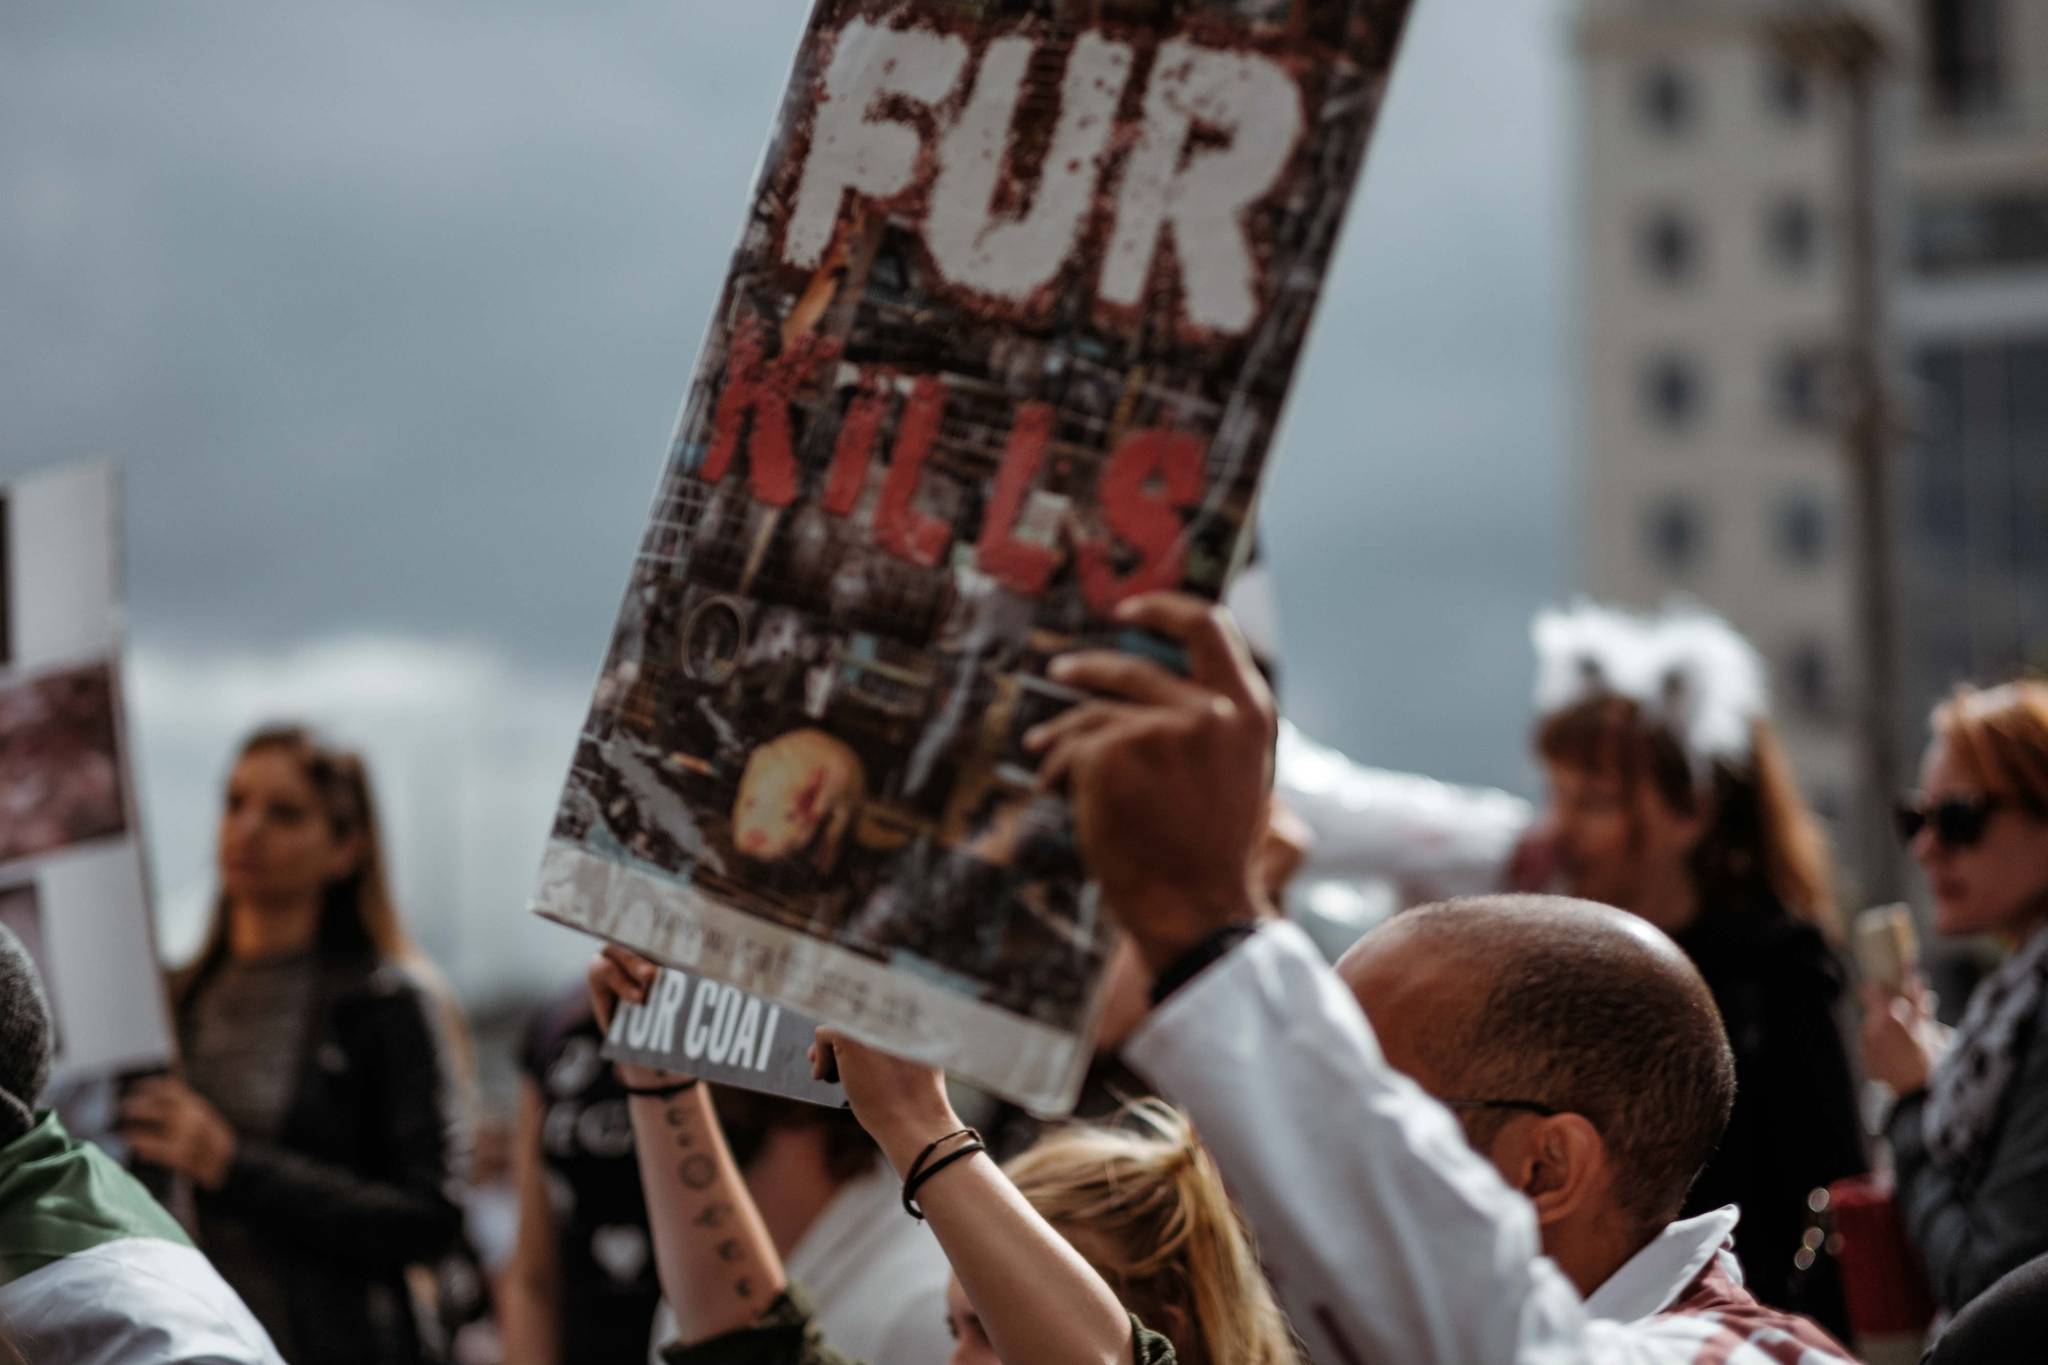 LA goes fur-free for ethical luxury shoppers